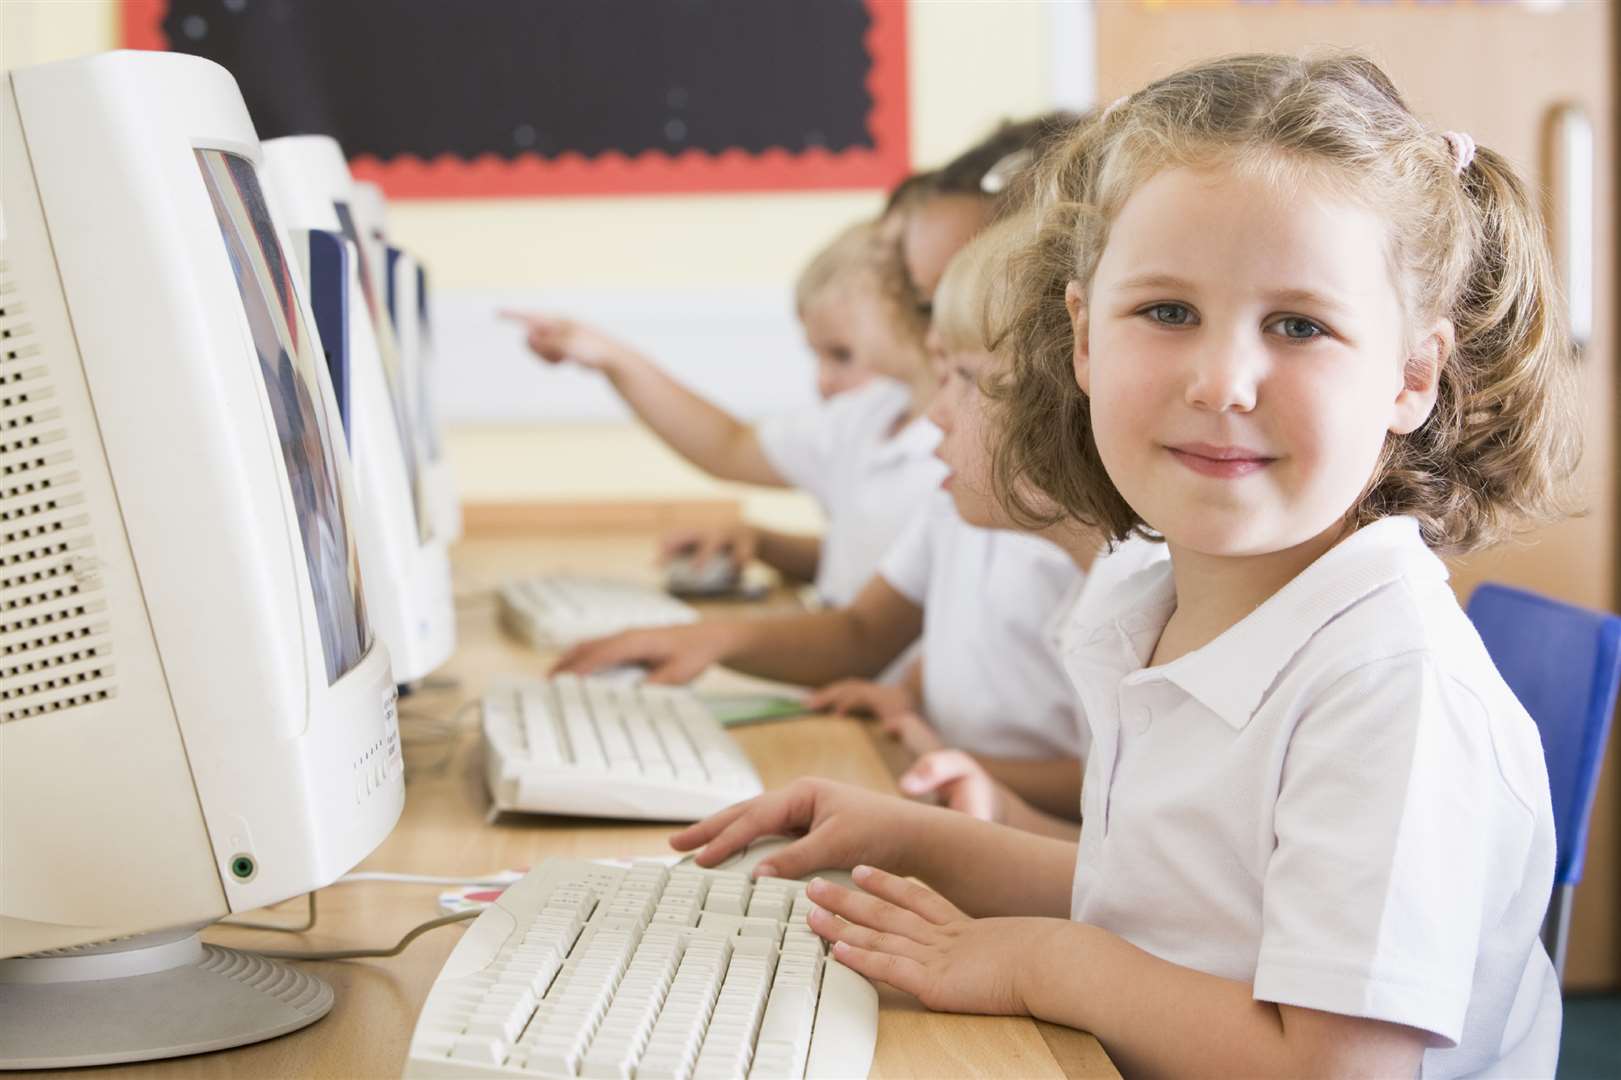 There is a growing emphasis on the importance of e-safety both at school and at home